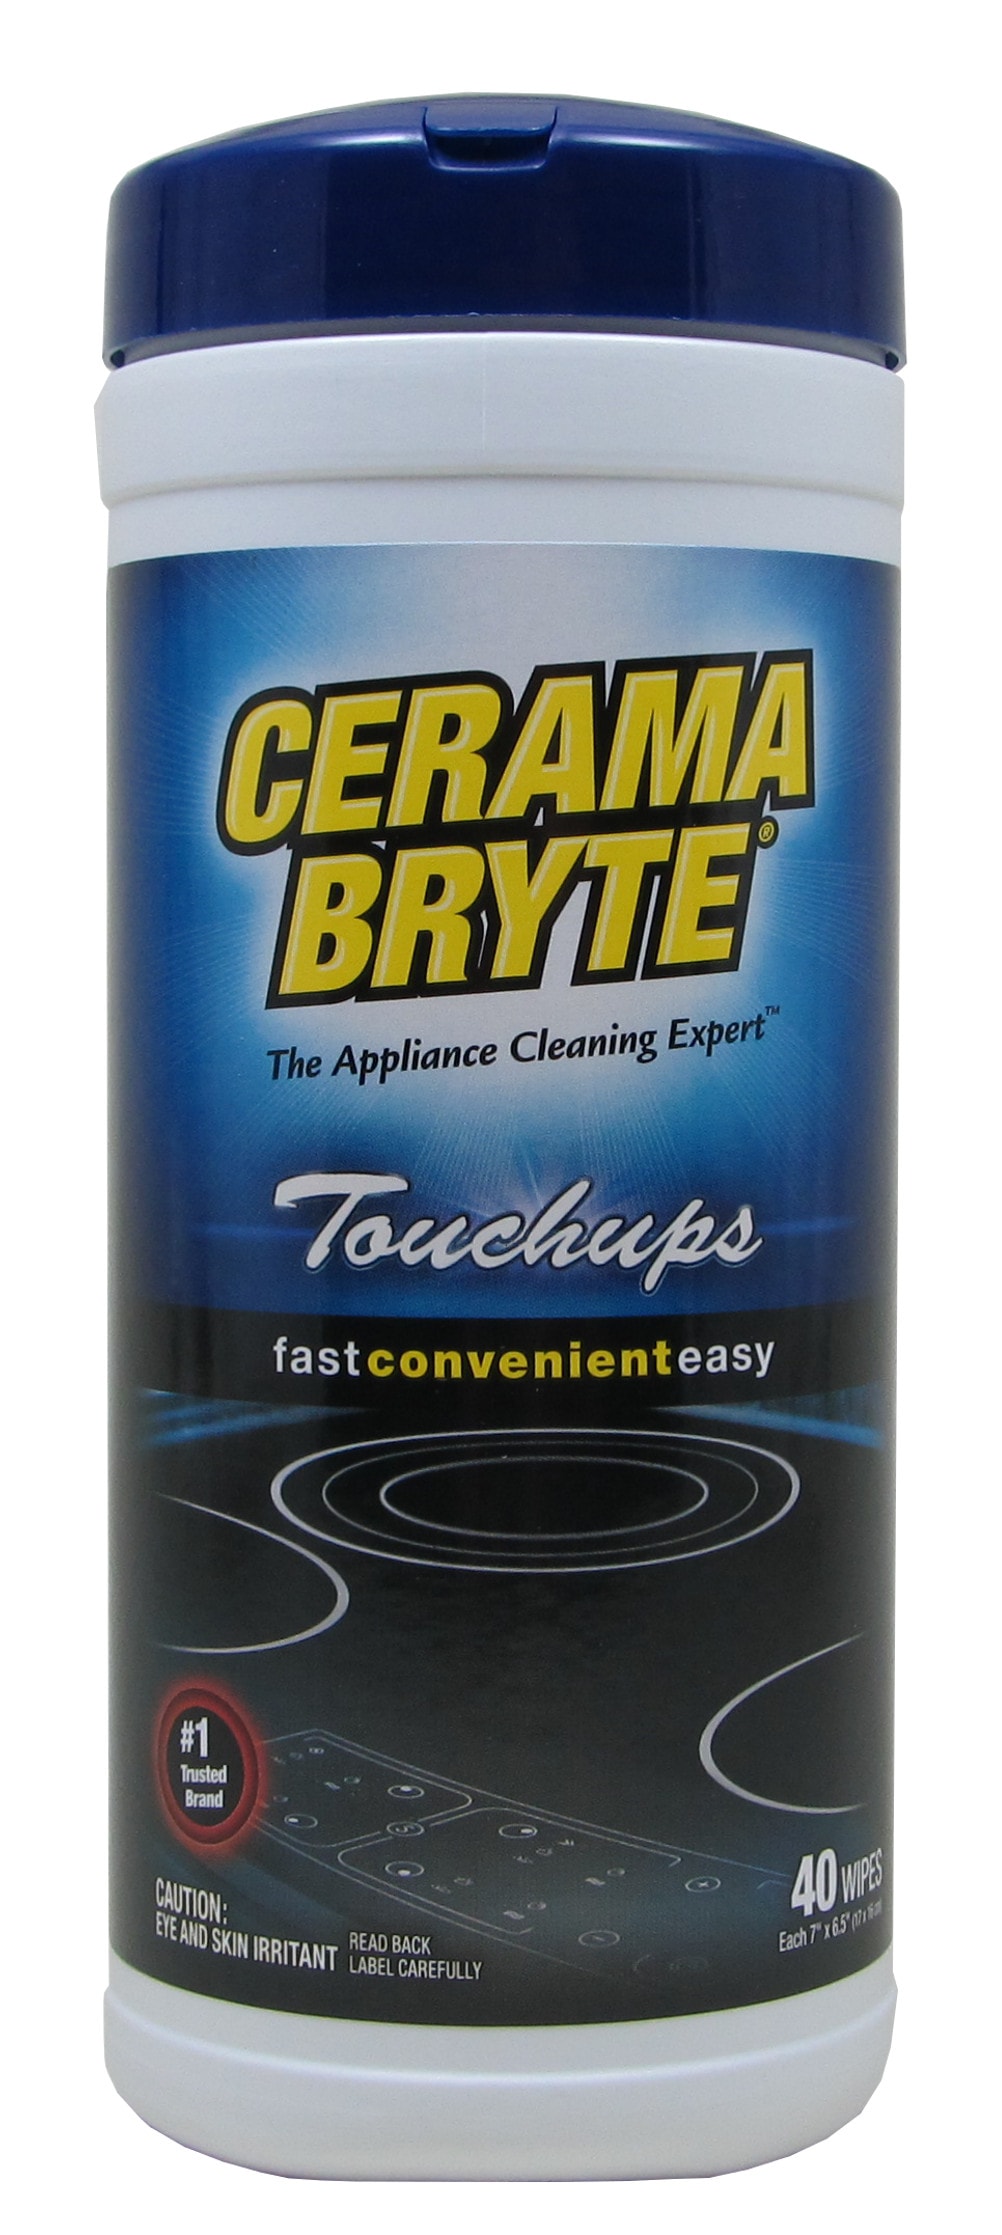 Cerama Bryte Stainless Steel Wipes 35 - Curacao 